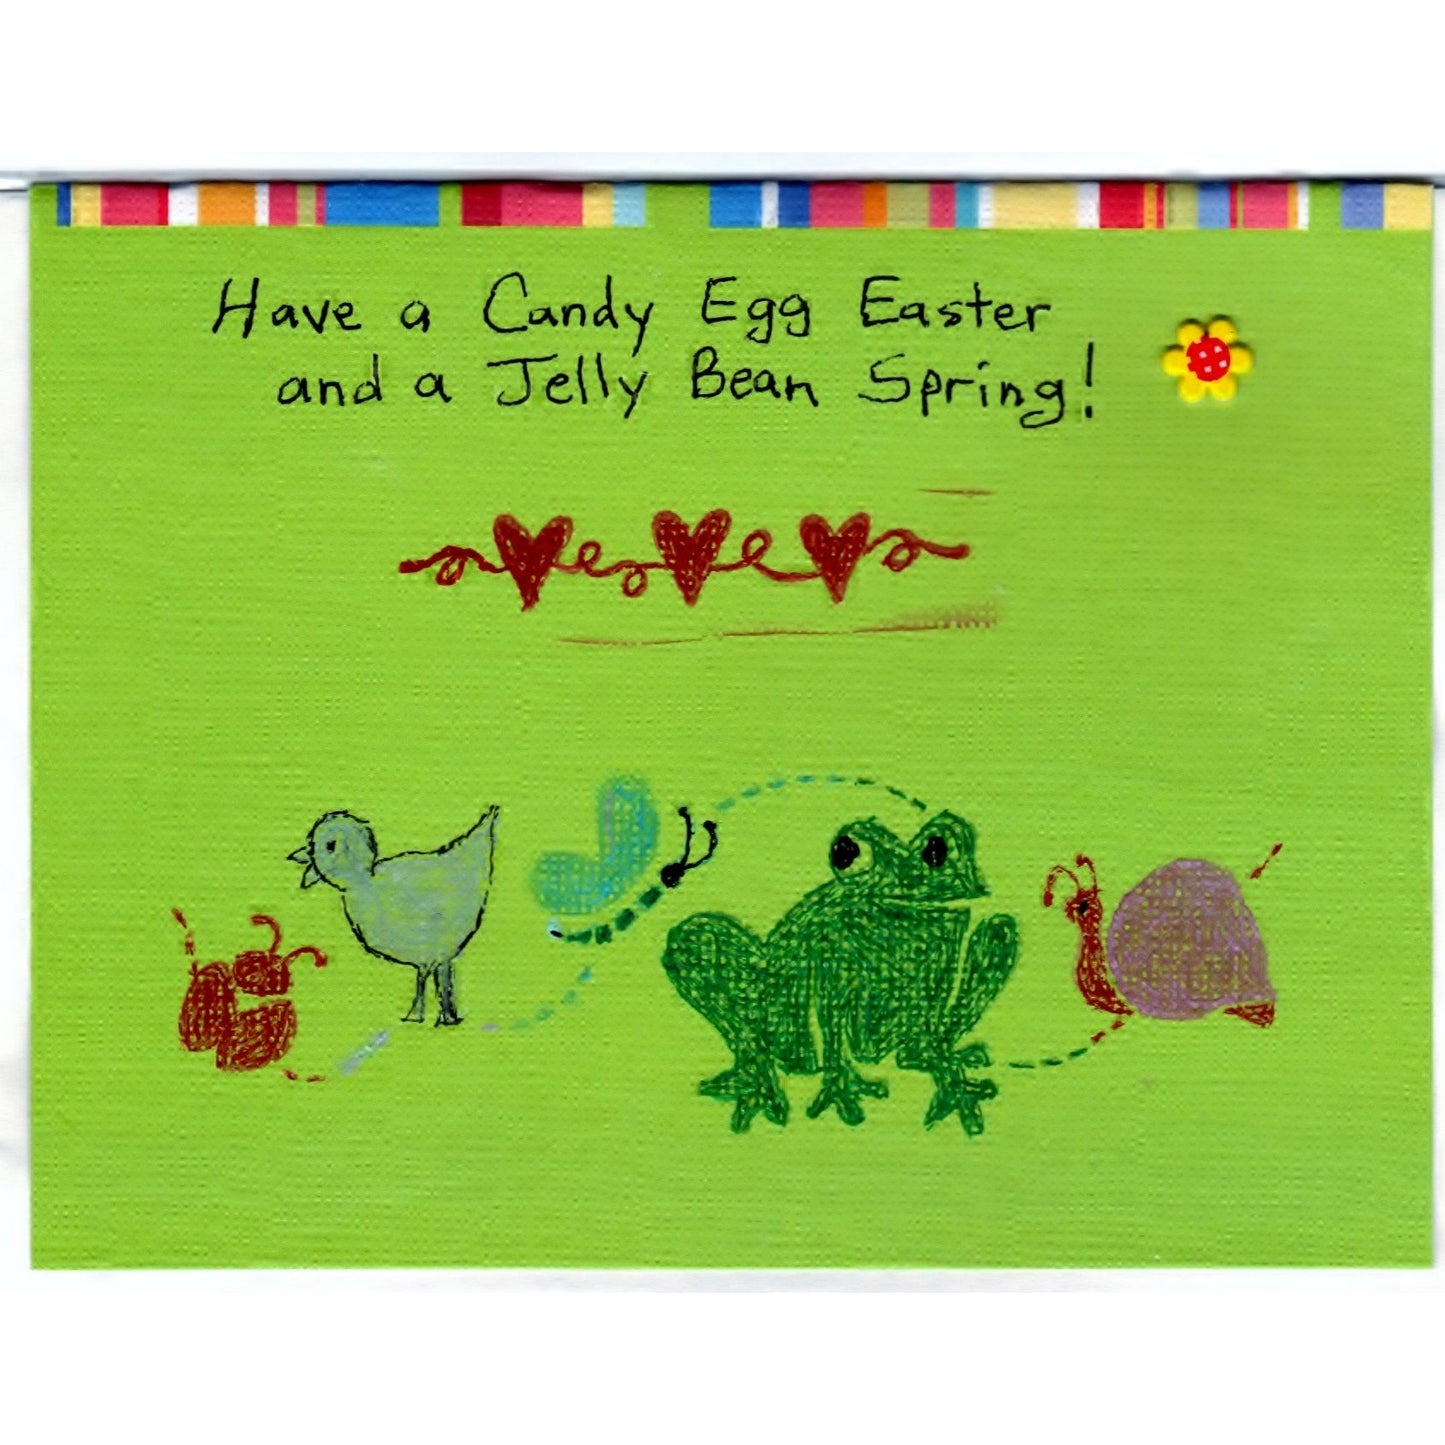 Easter Handmade Bug Duck Frog Good Greeting Supply Card - Cards And Other Paper Products - Made In U.S.A. - SharPharMade - 1